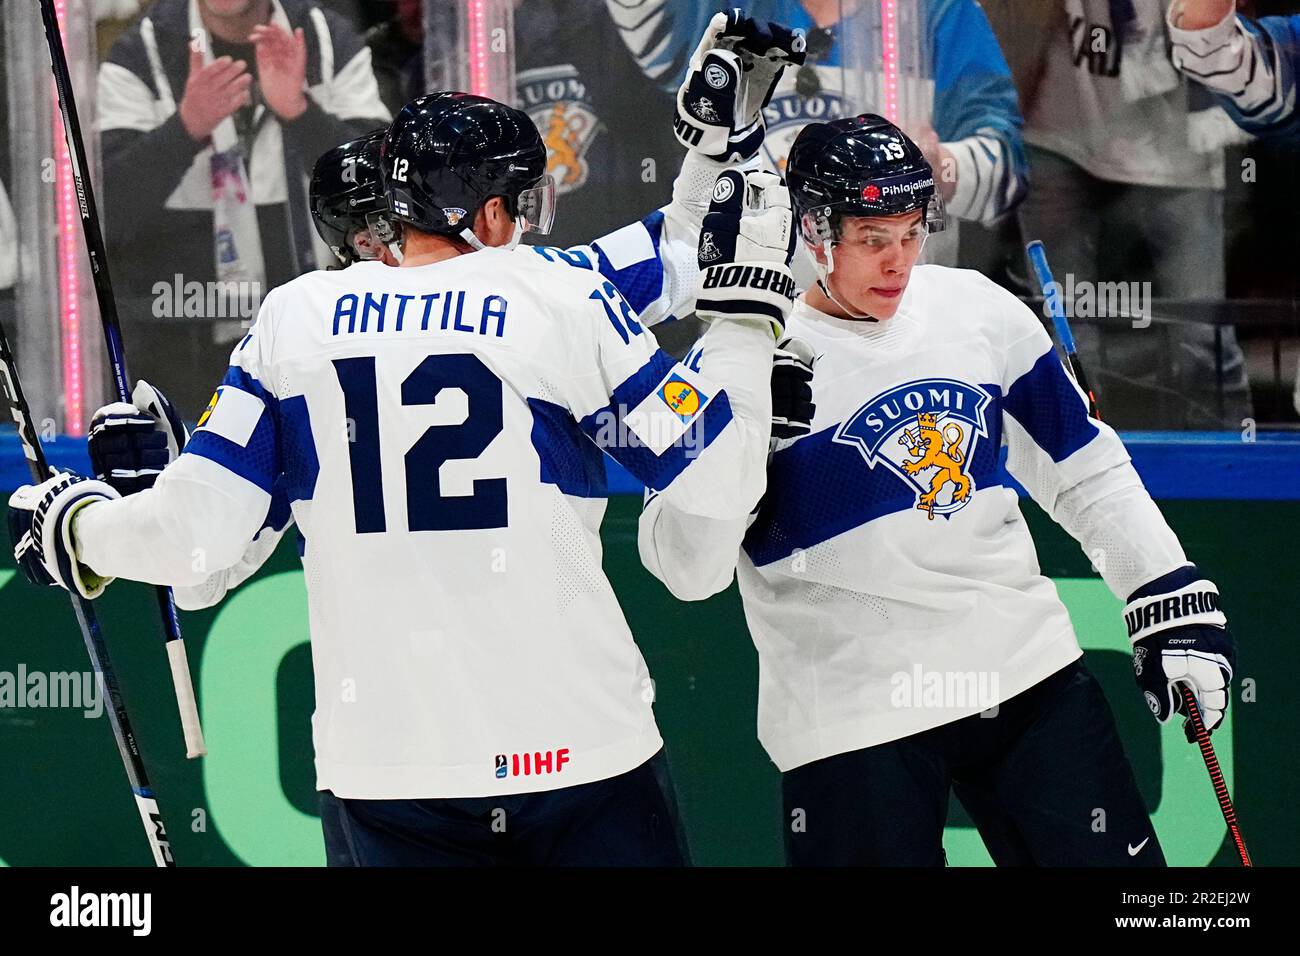 Finland's Waltteri Merela, right, celebrates with teammates after scoring  his side's sixth goal during the group A match between Hungary and Finland  at the ice hockey world championship in Tampere, Finland, Friday,